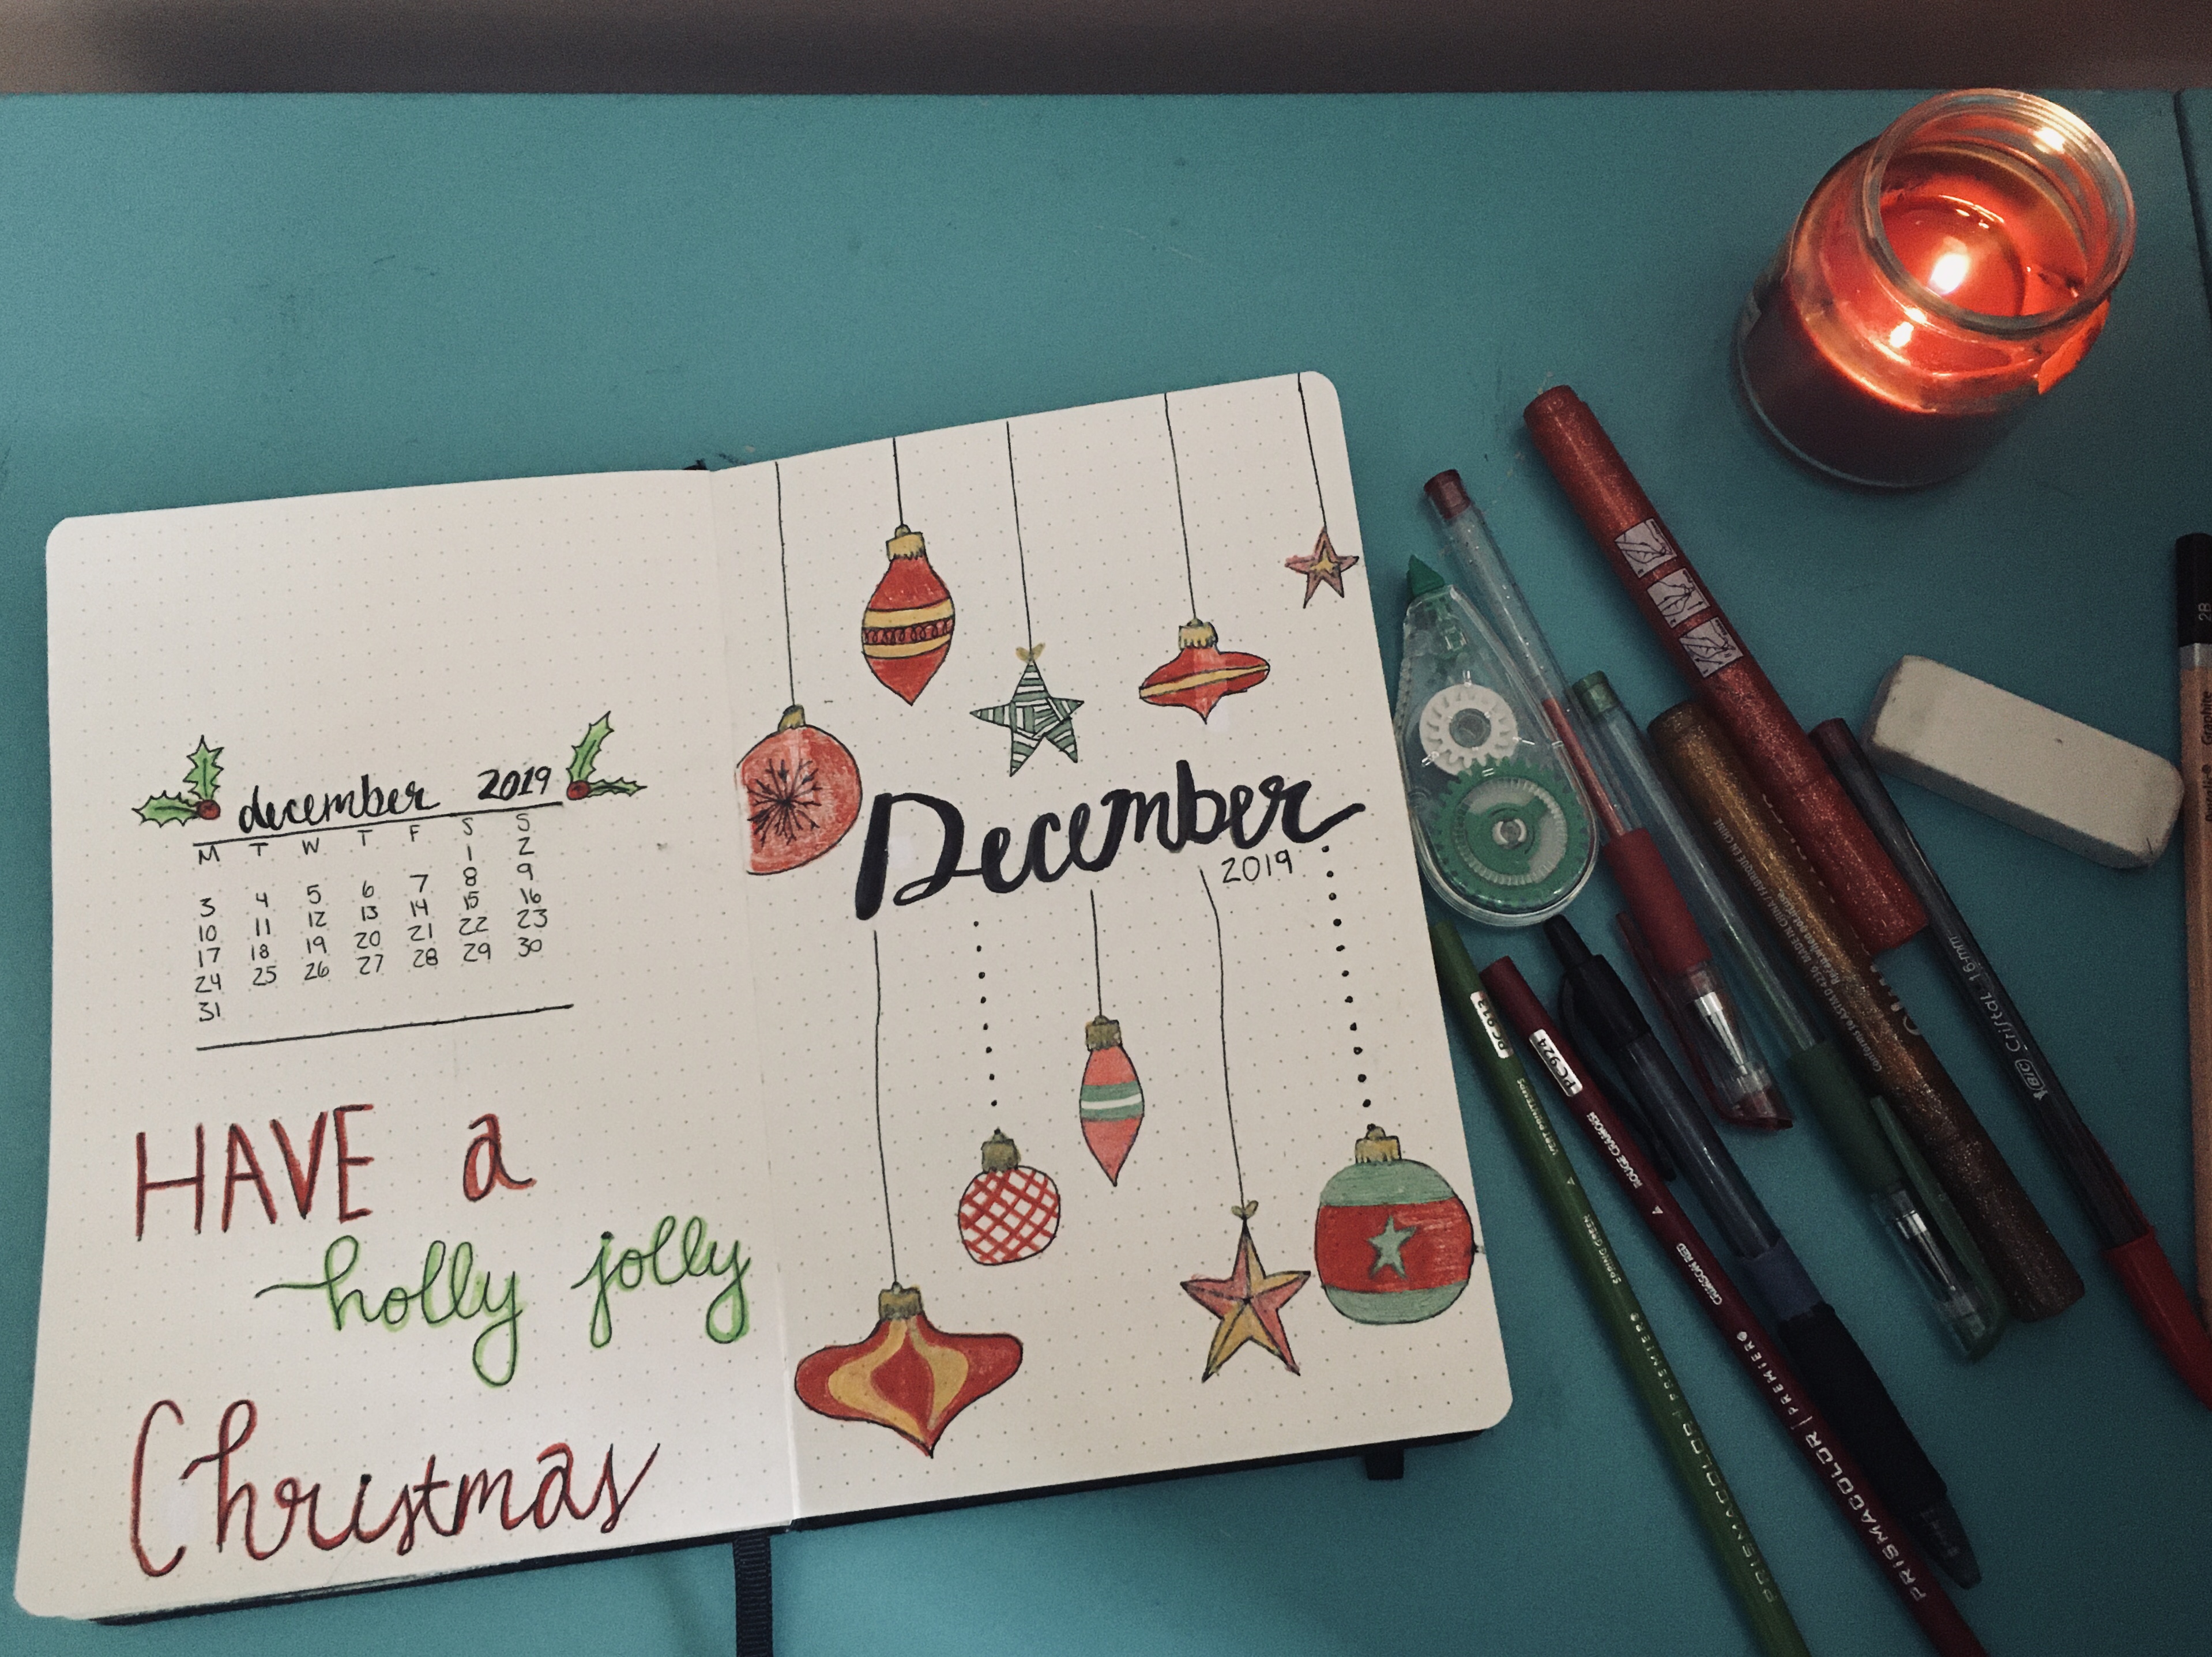 Do Real People Actually Bullet Journal?, by Liana Heath